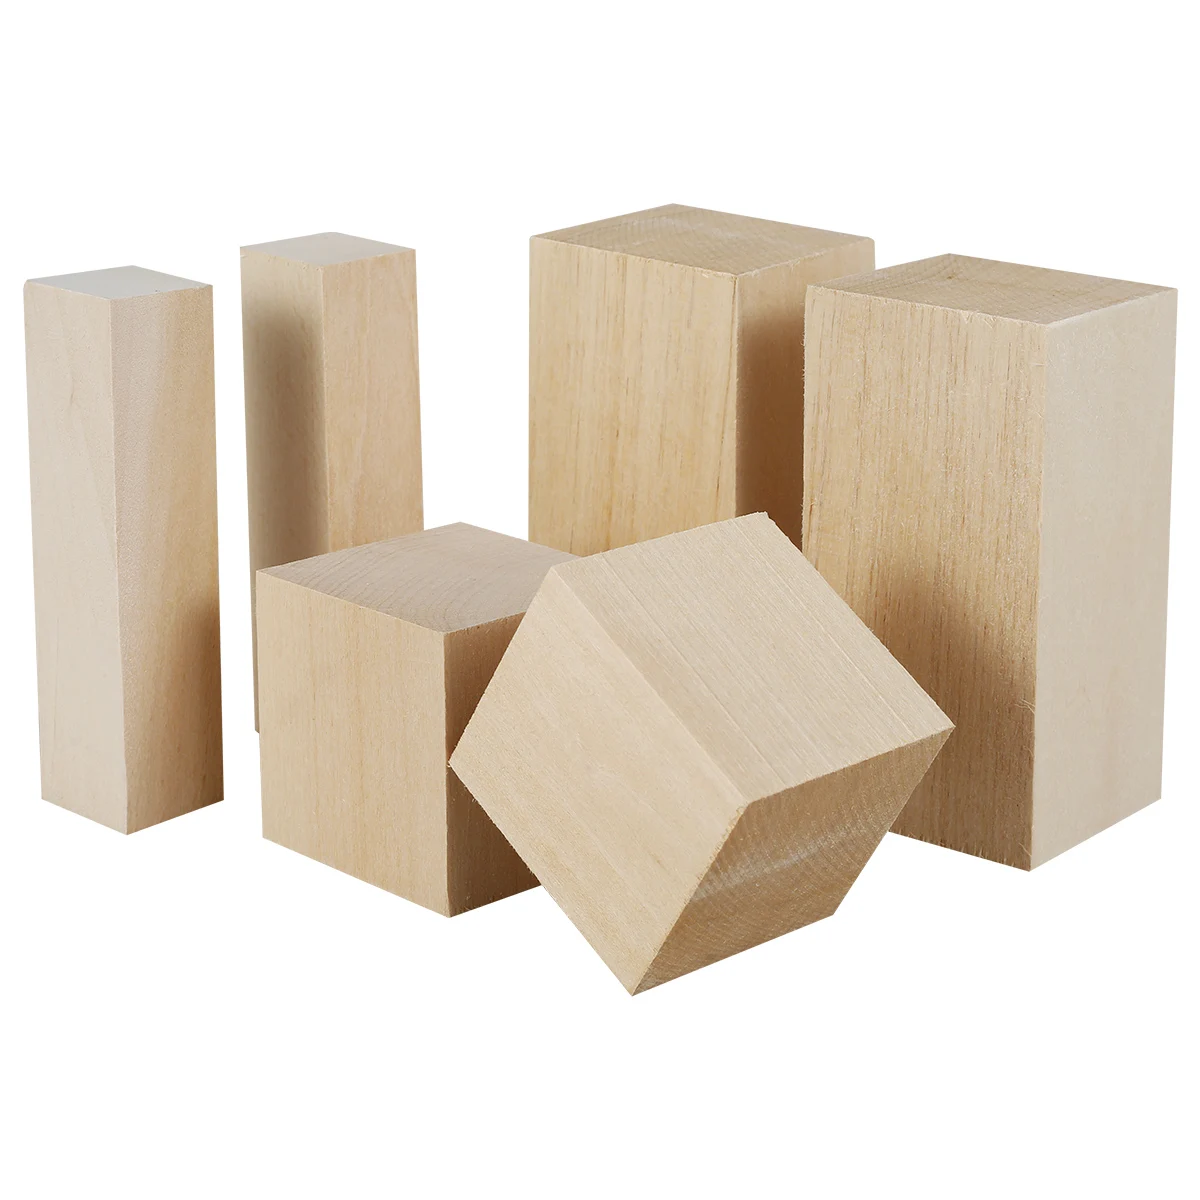 6 Pack Basswood Carving Blocks Kit, 6 x 2 x 2 Inch Unfinished Bass